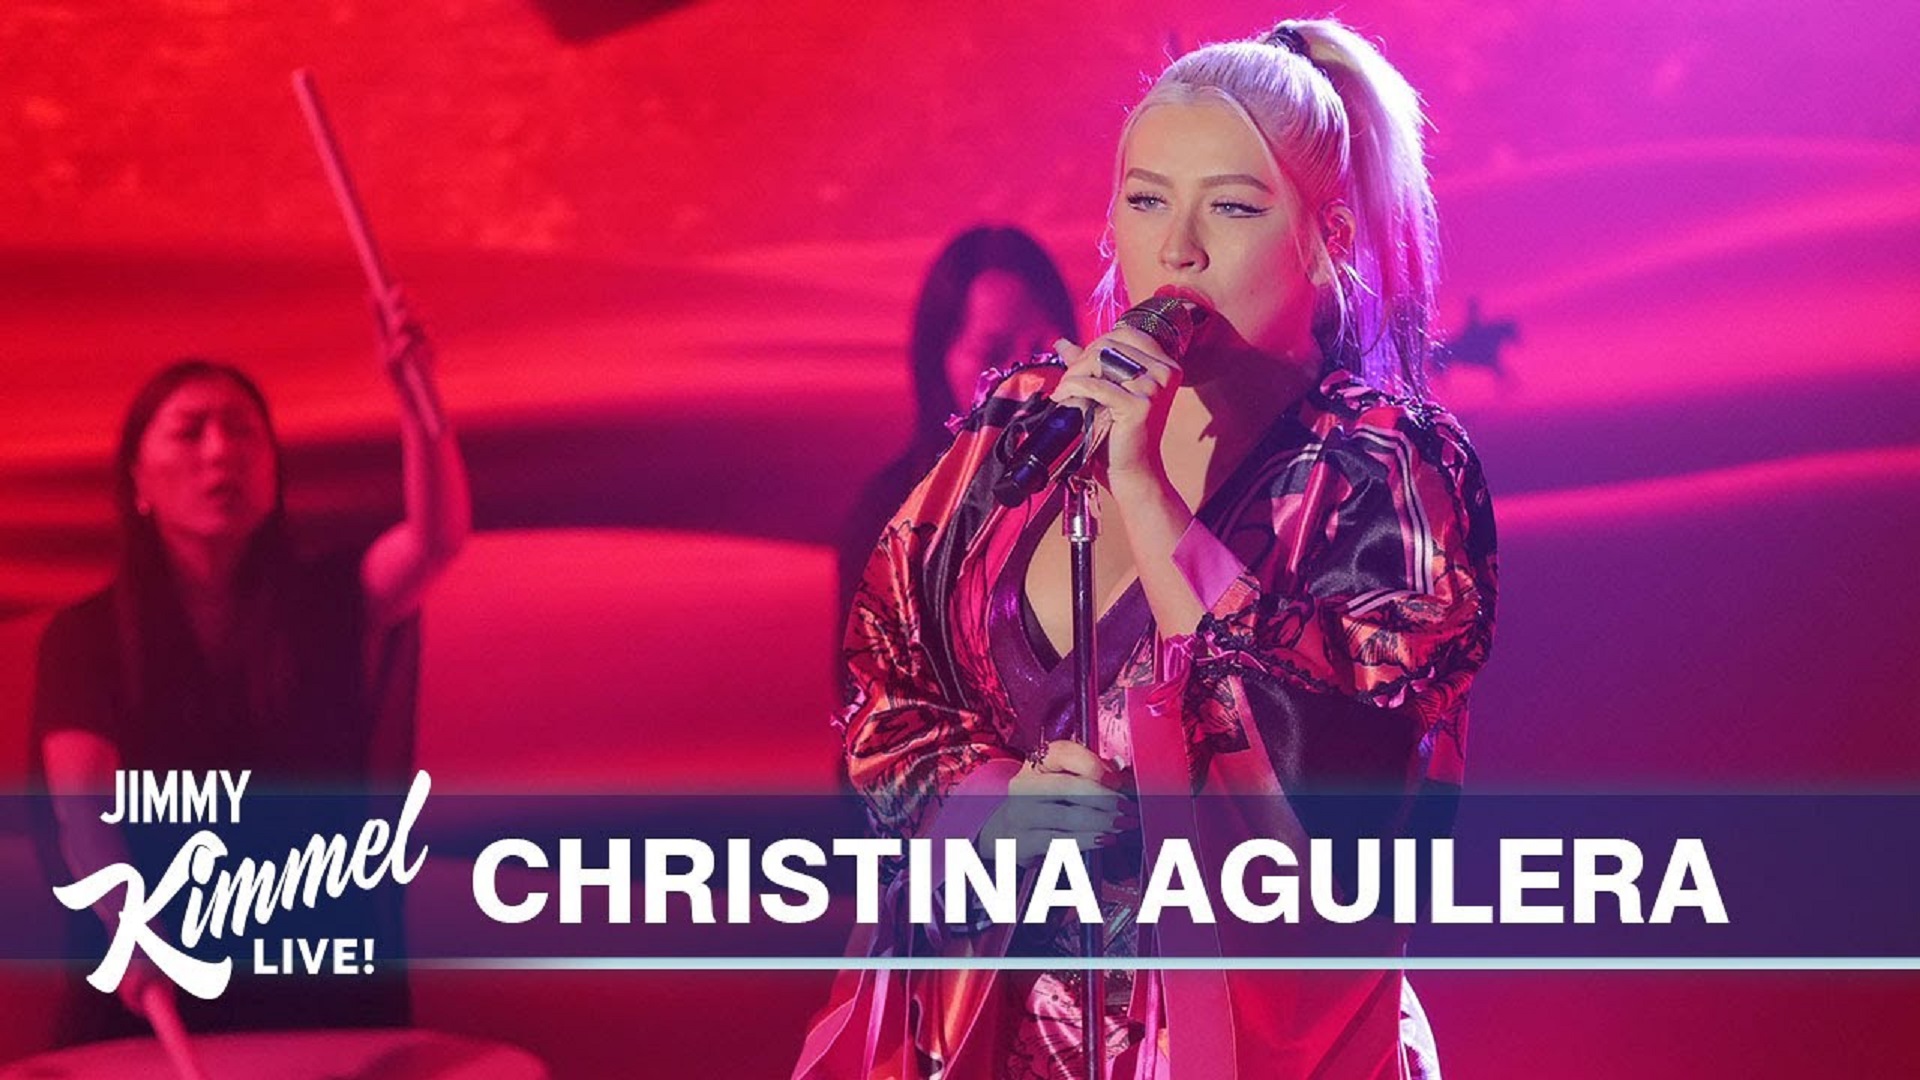 Watch: Christina Aguilera Performs Her New Song From ‘Mulan’ – ‘Loyal Brave True’ on Kimmel